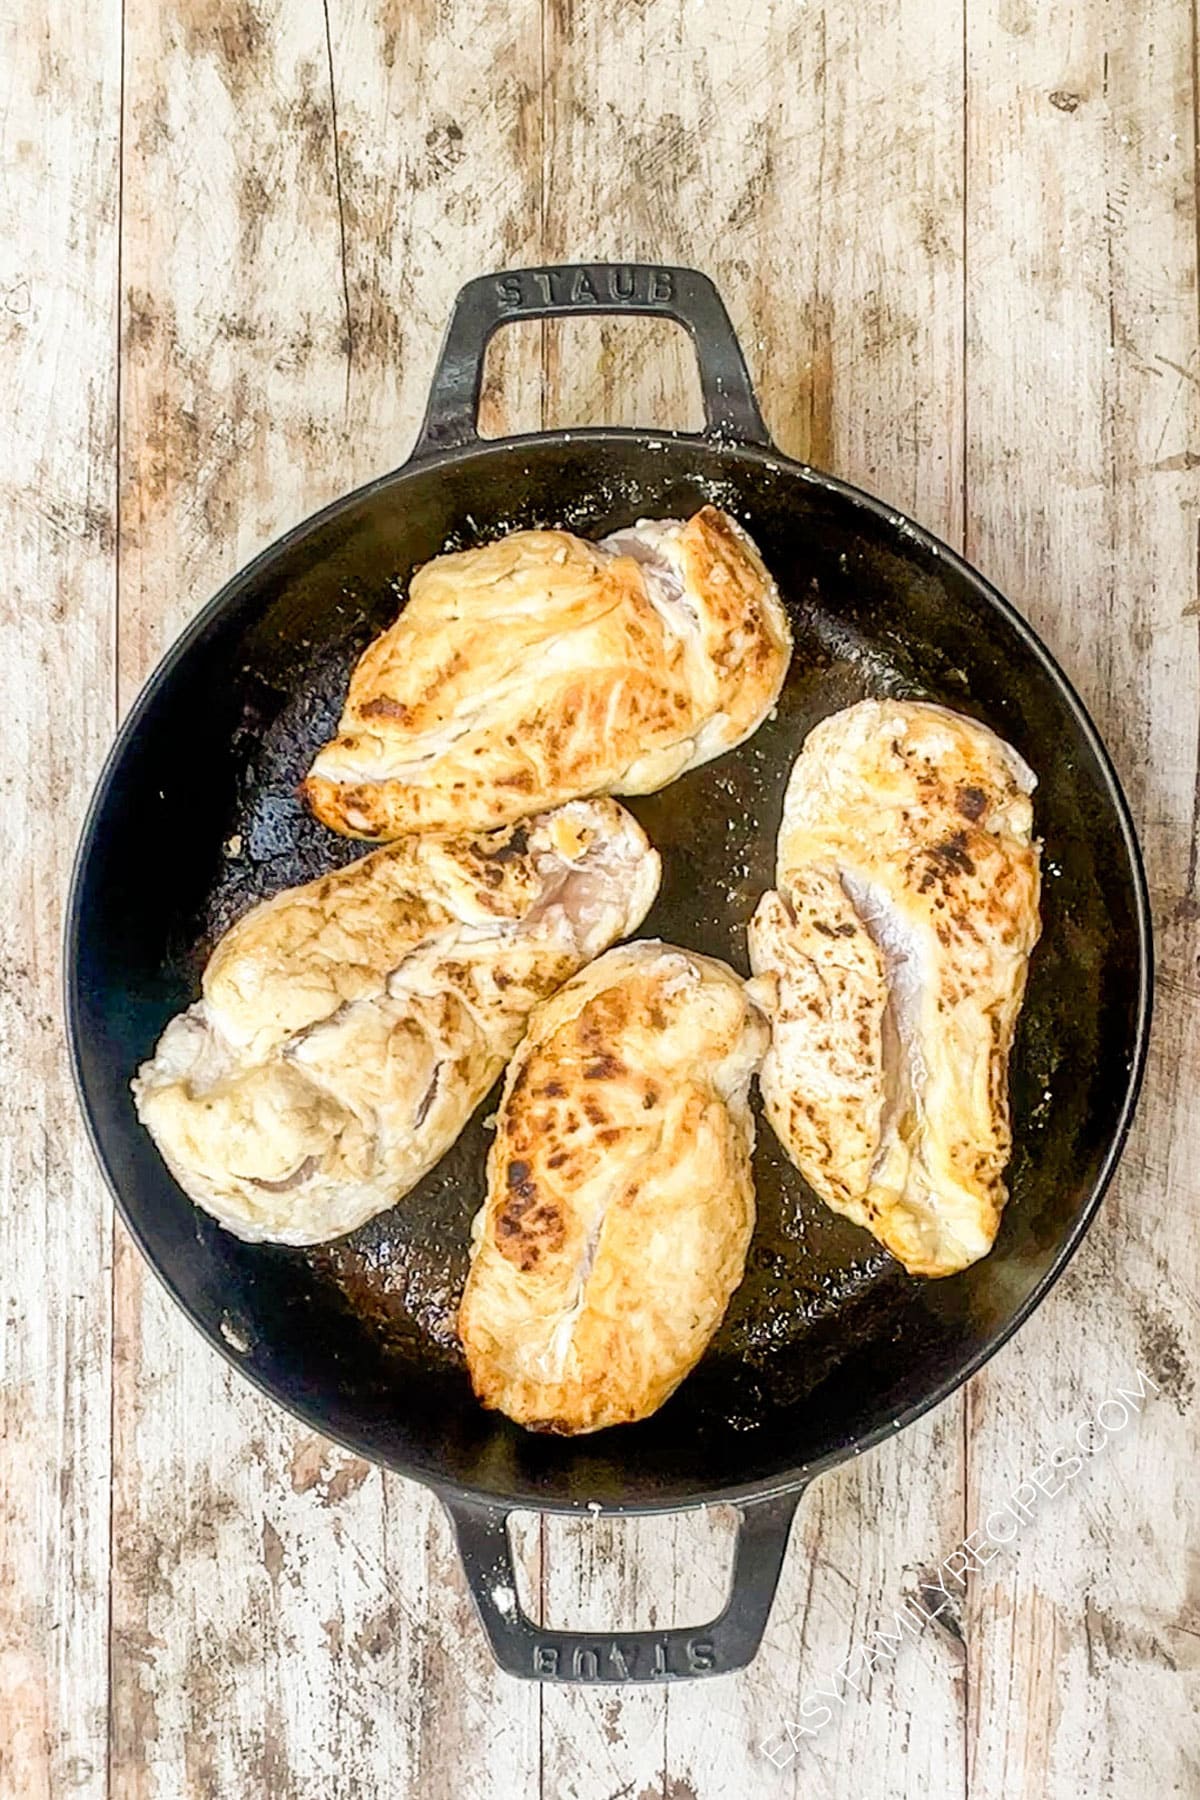 Four chicken breasts in a pan after searing.